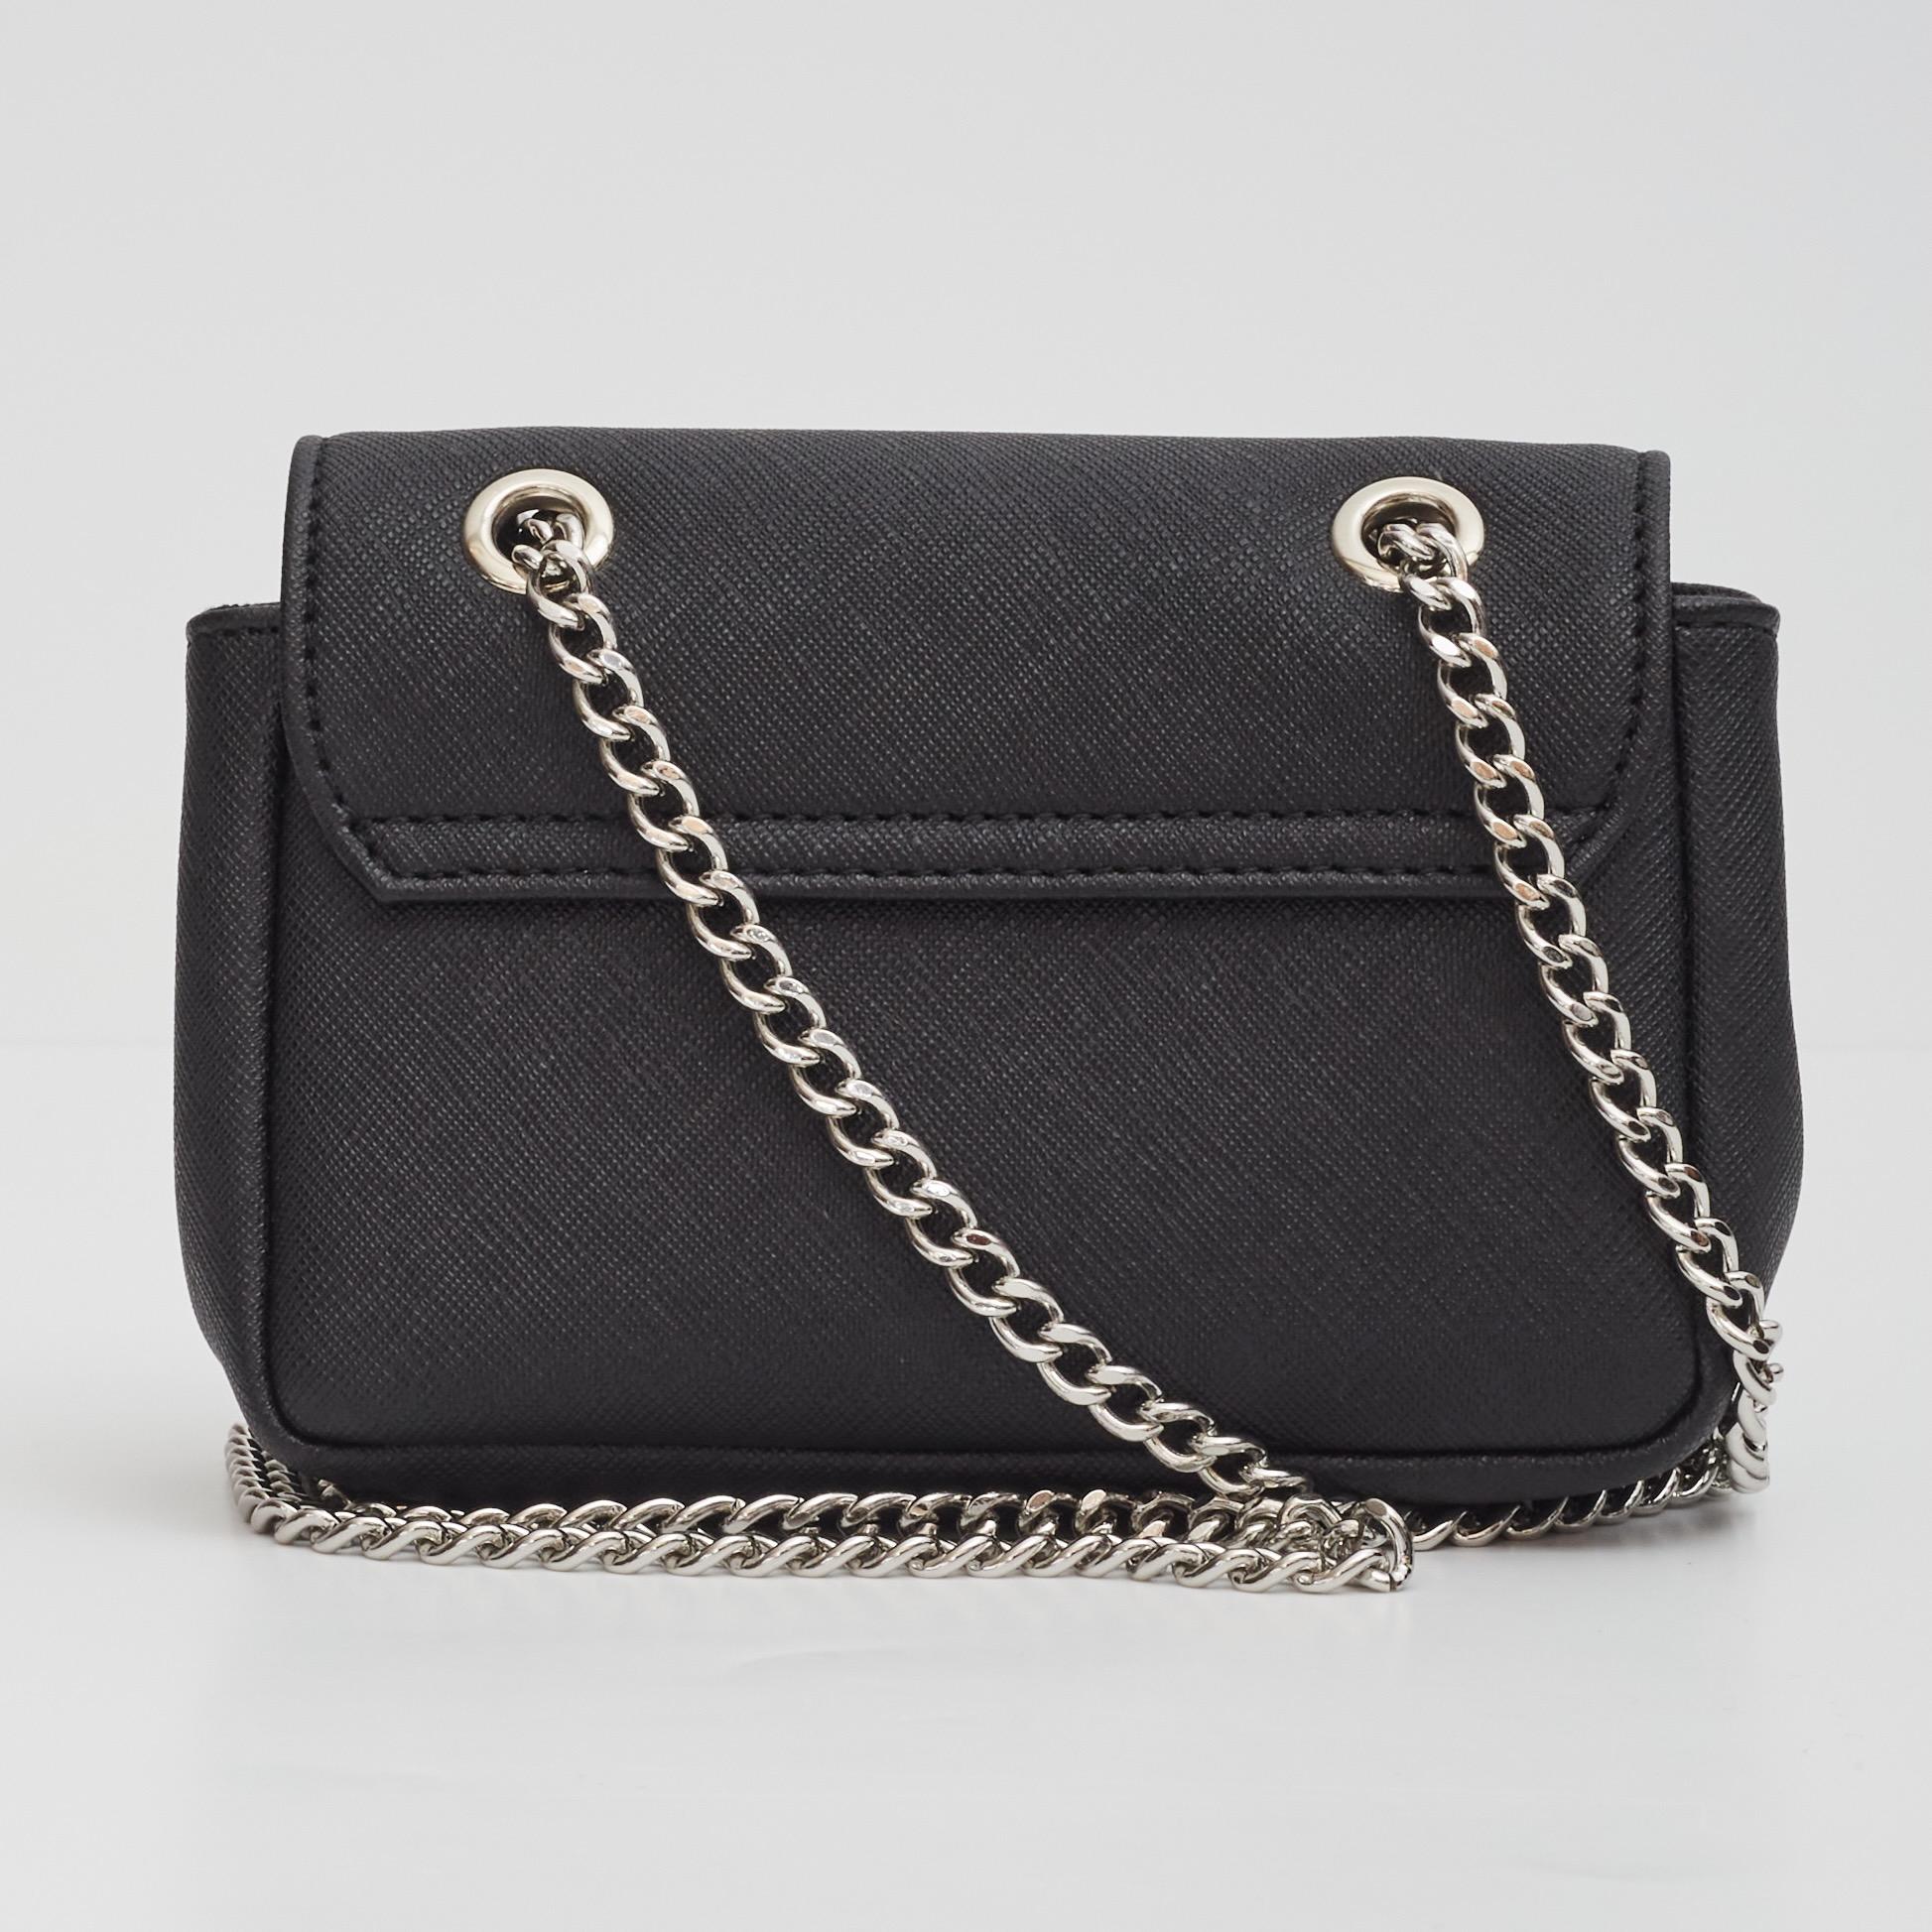 The Derby small purse with chain is made in Italy from vegan leather and threaded with a silver-tone chain, so it can be worn on the shoulder or carried as a clutch. It is complete with an orb on the front and constructed with a flap and press-stud